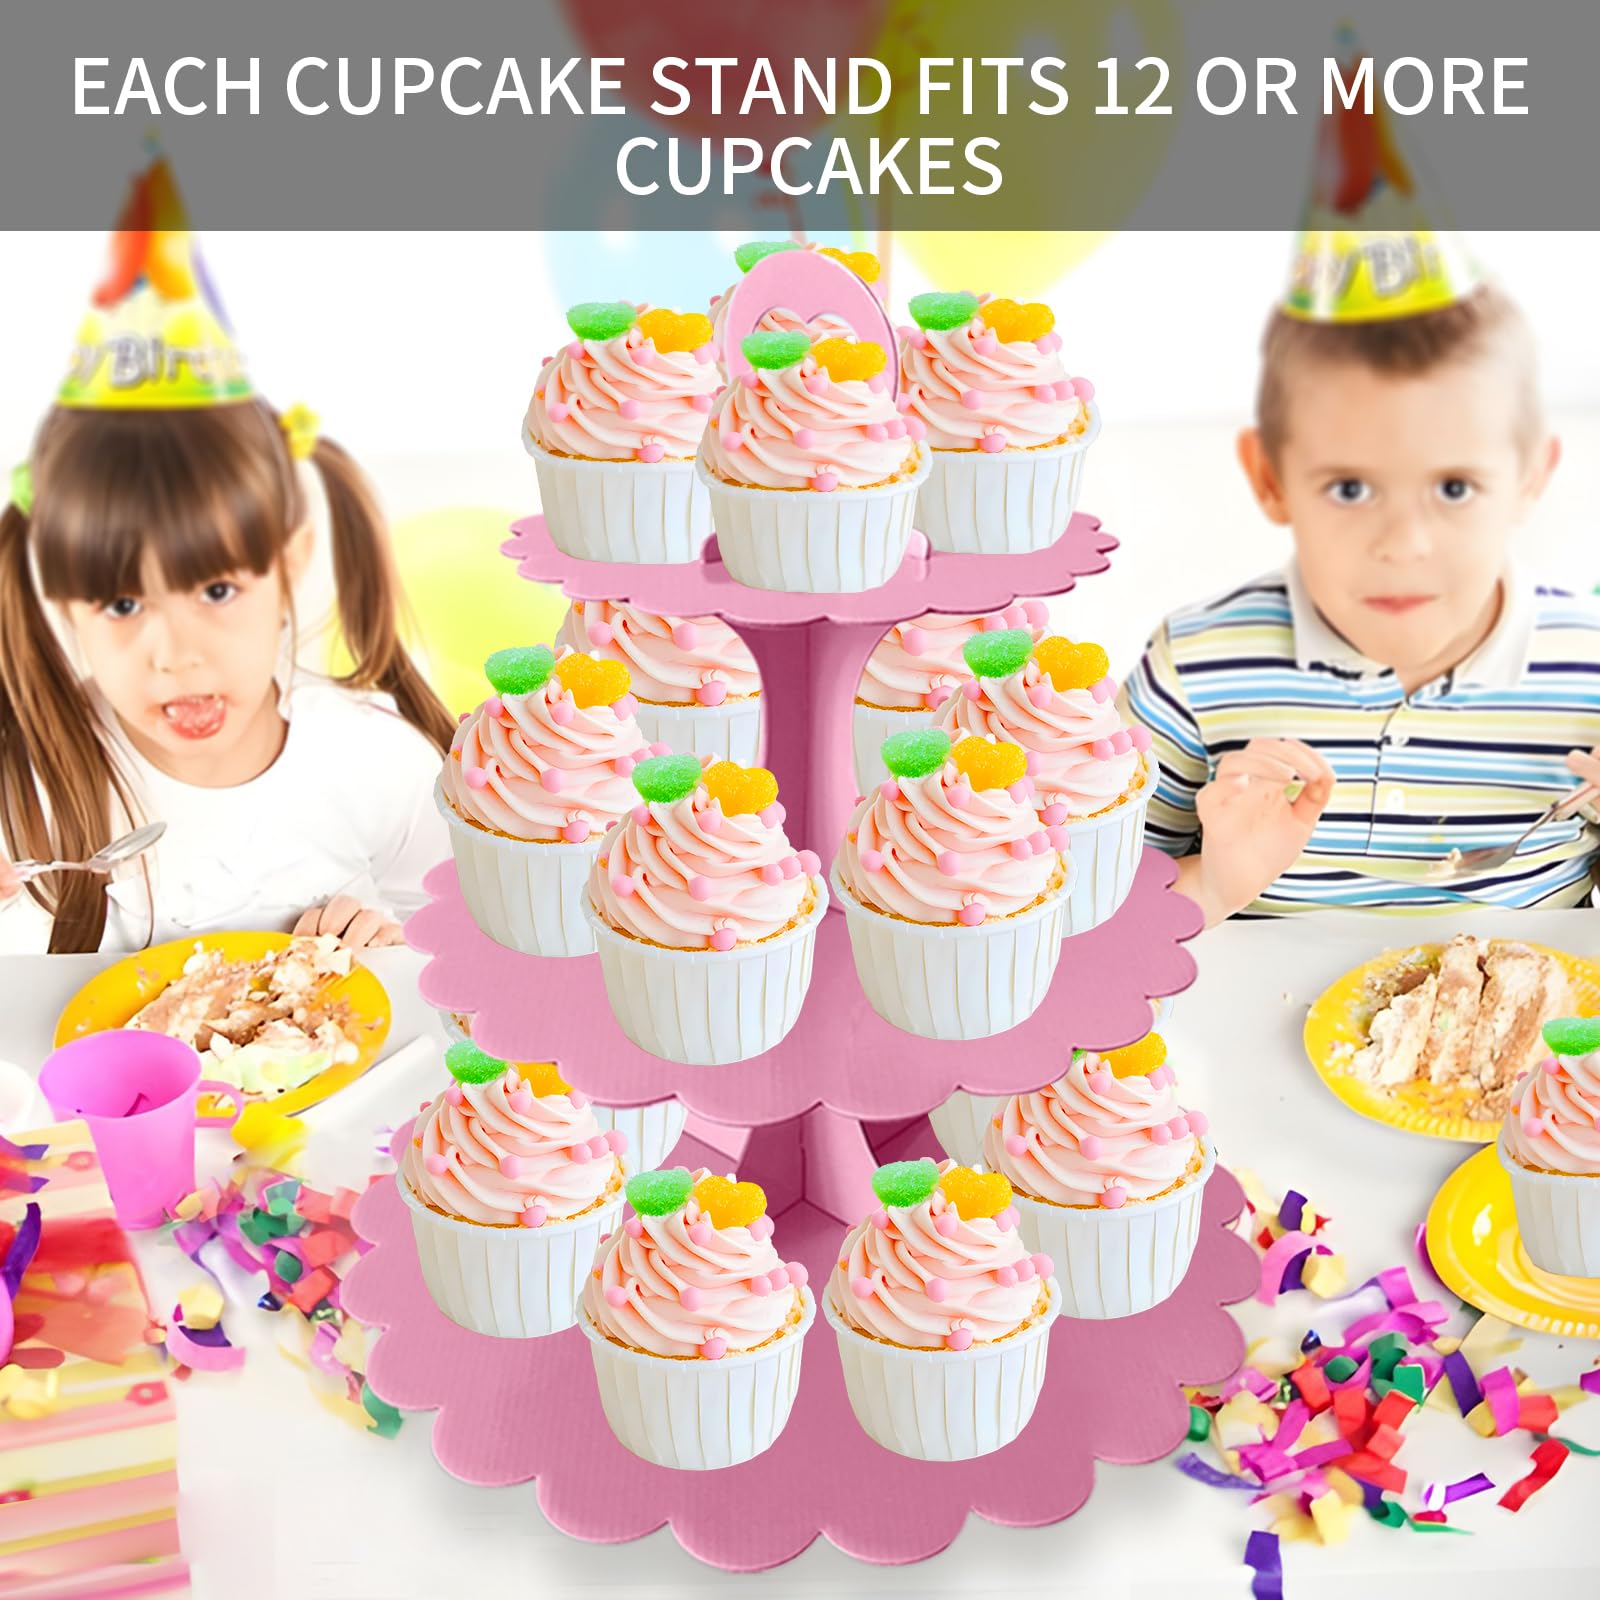 Humlindo 2 Pack Pink Cupcake Stand Tower, 3-Tier Cardboard Cup Cake Display Dessert Holder for Parties Holidays Birthday Party Wedding Baby Shower Anniversaries Decoration, Tiered Cupcake Stand